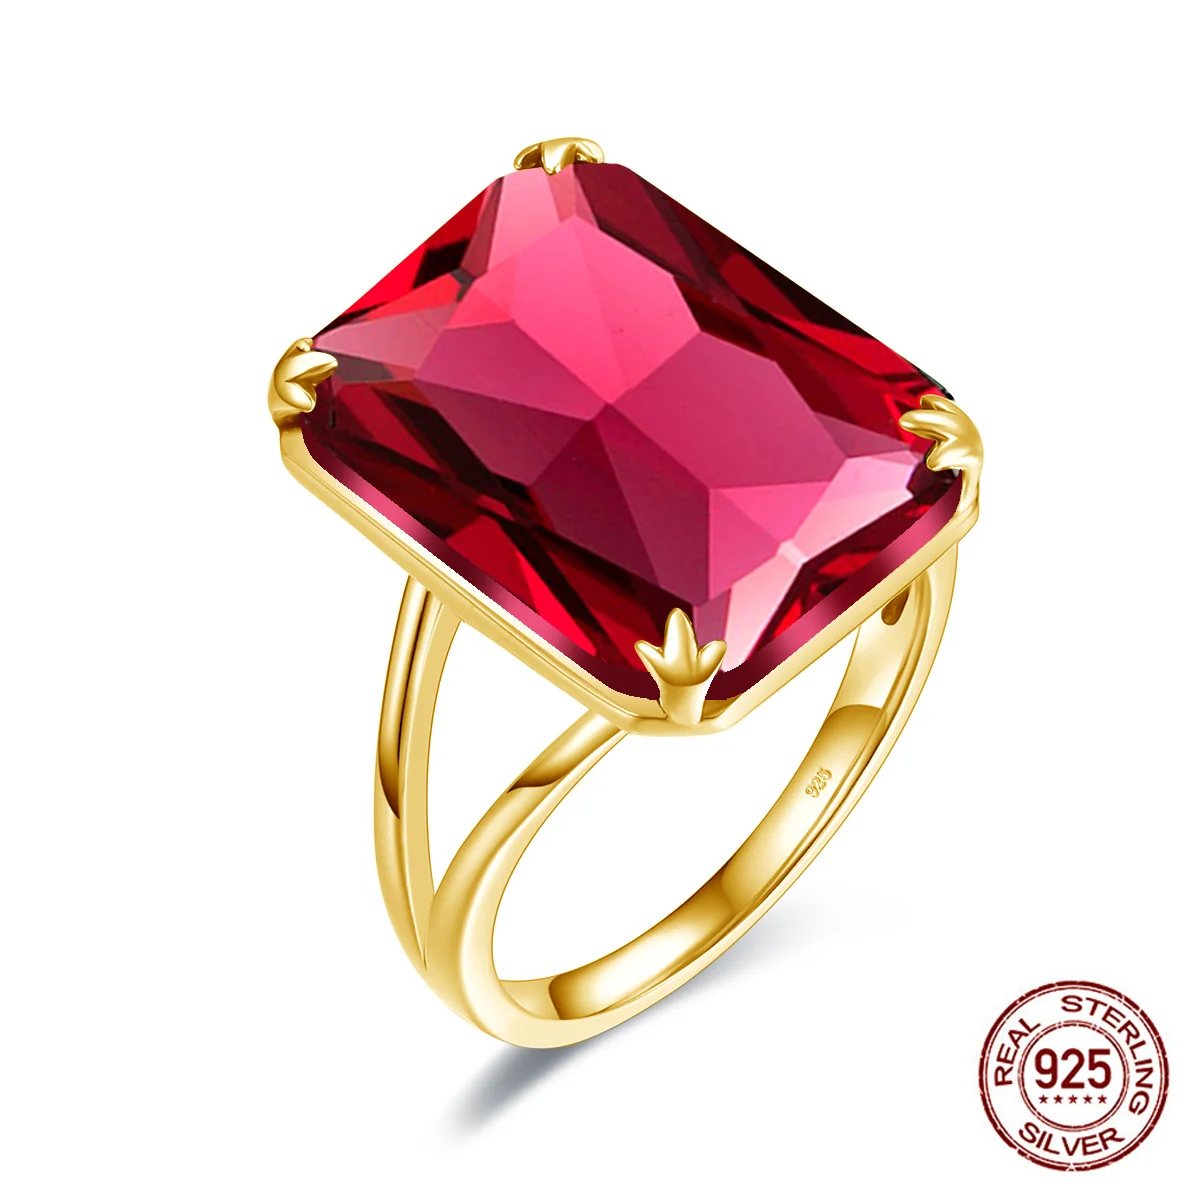 TRADITIONAL FASHION Ring 925 Silver Plated SIMULATED RUBY & Other Stones GIFT 